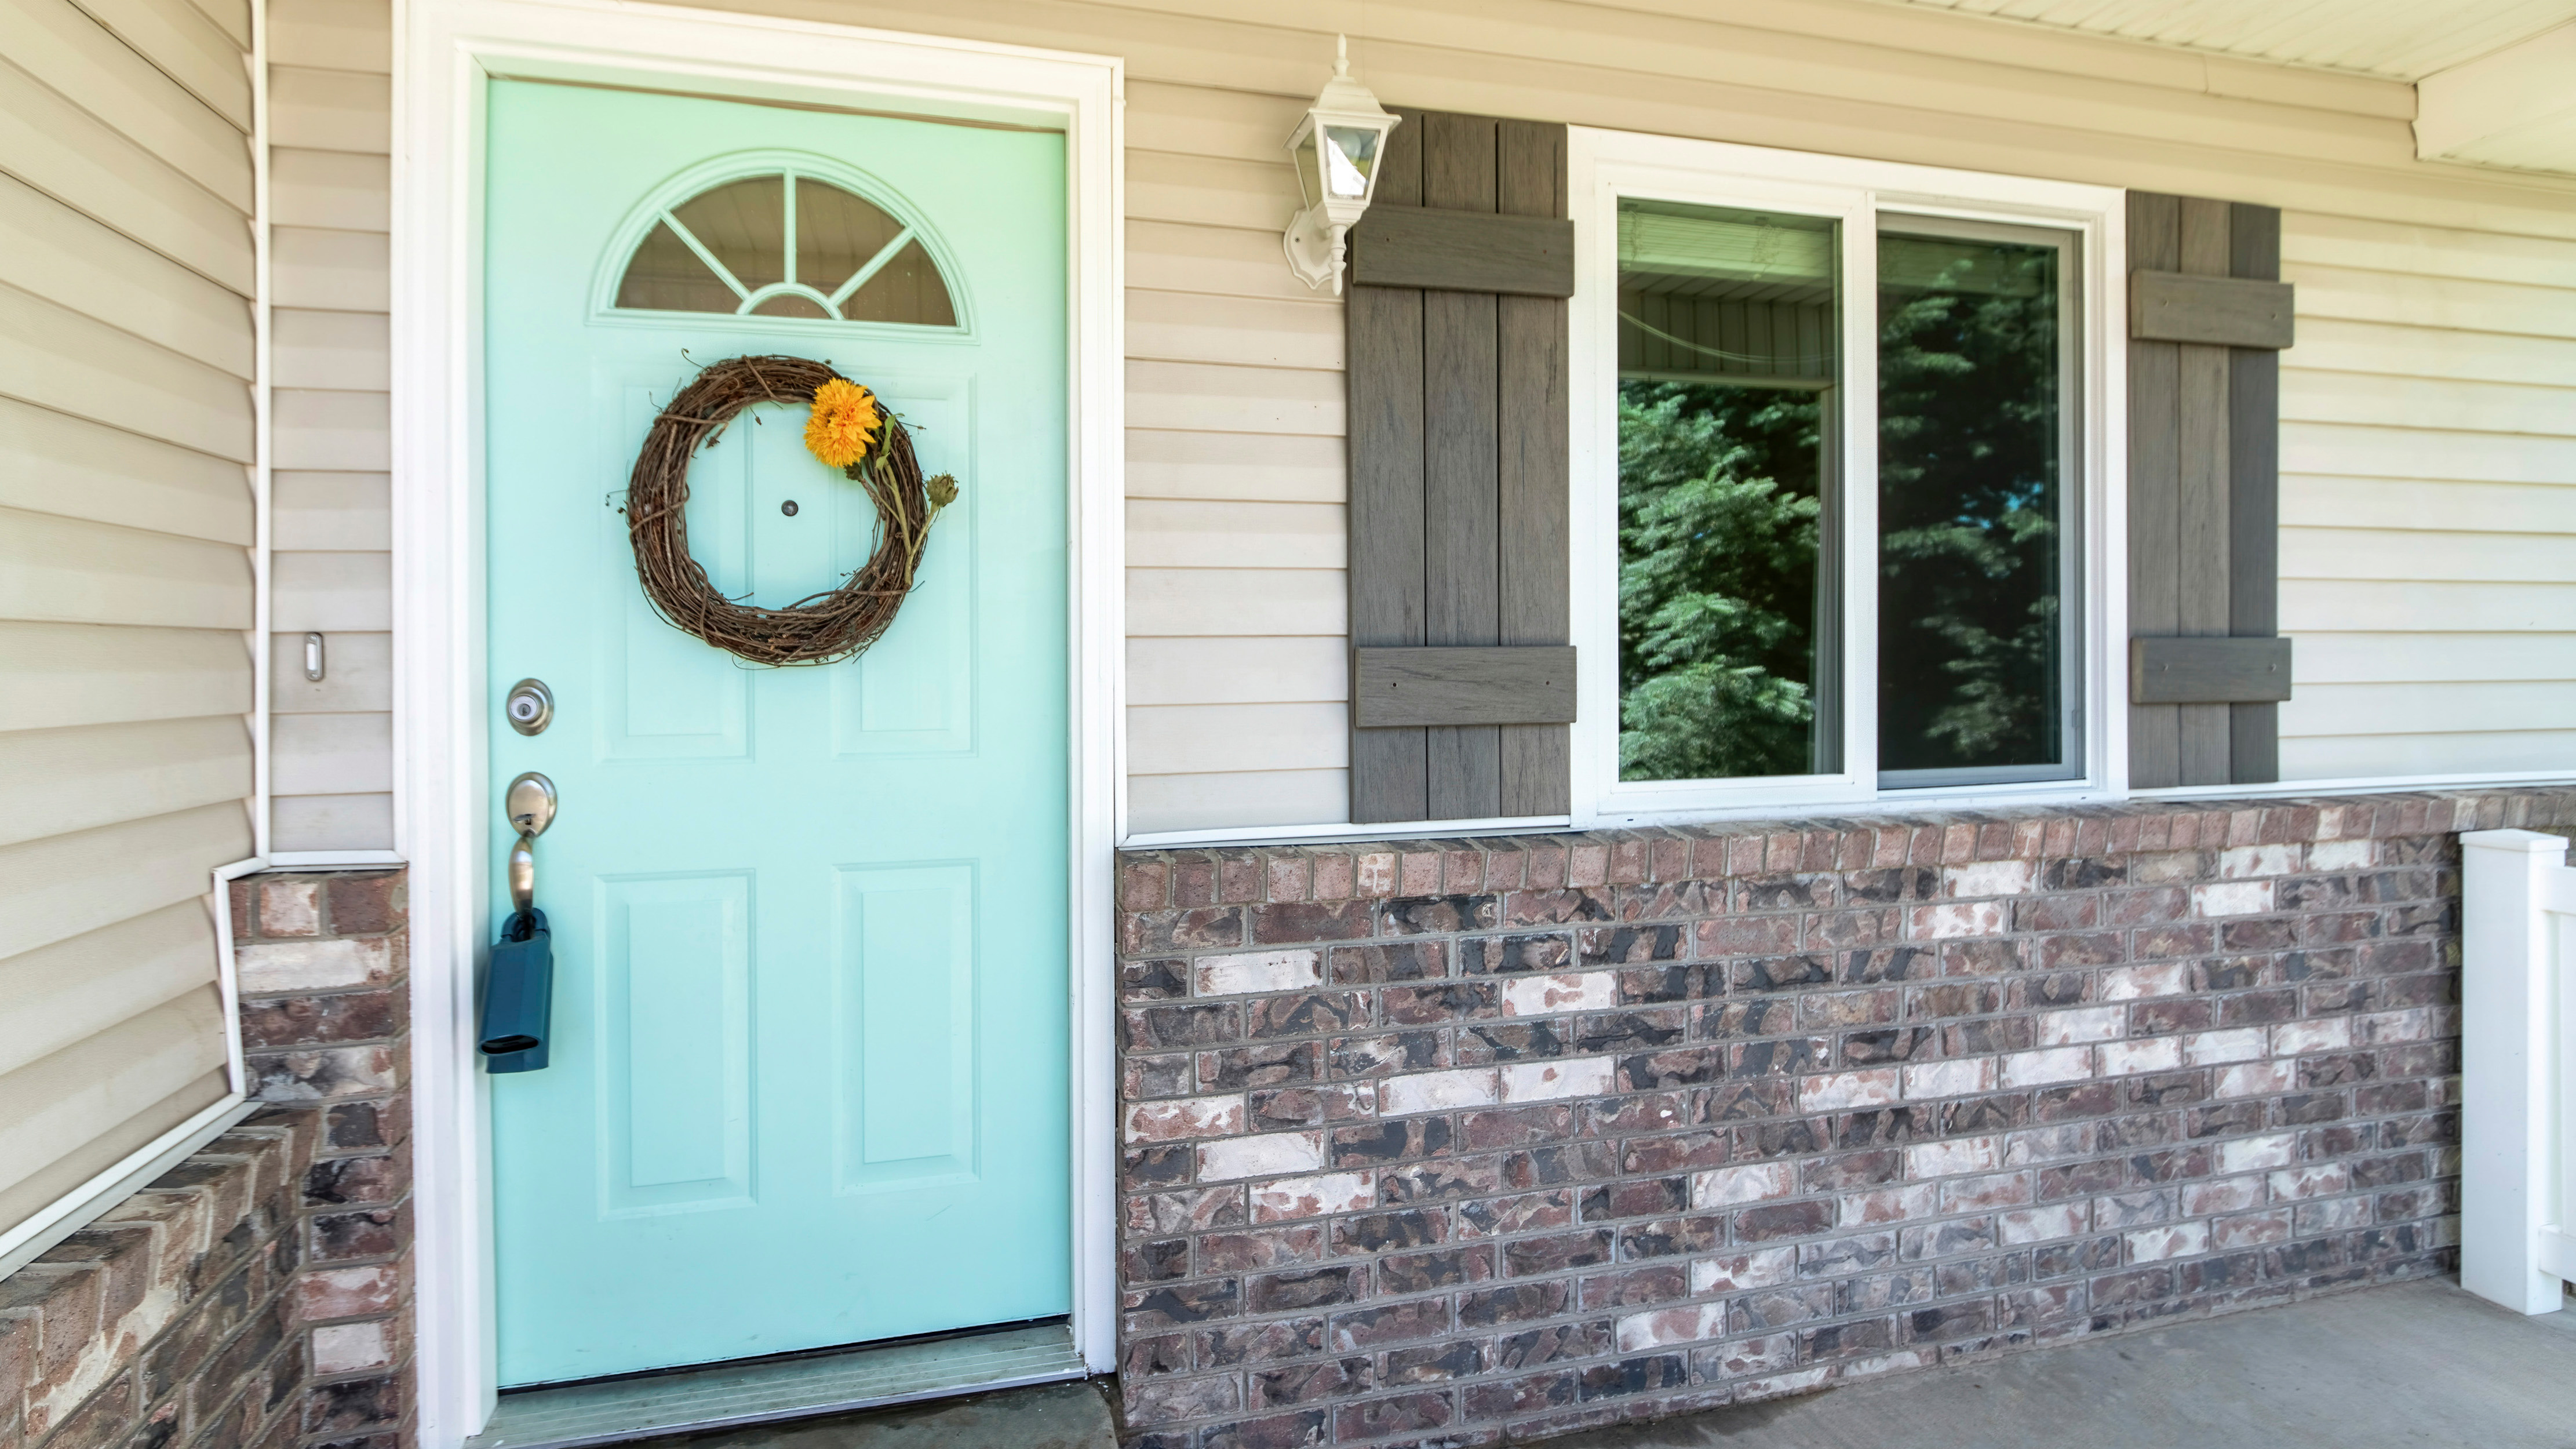 A mint green front door with a wreath and vinyl windows in a home exterior.